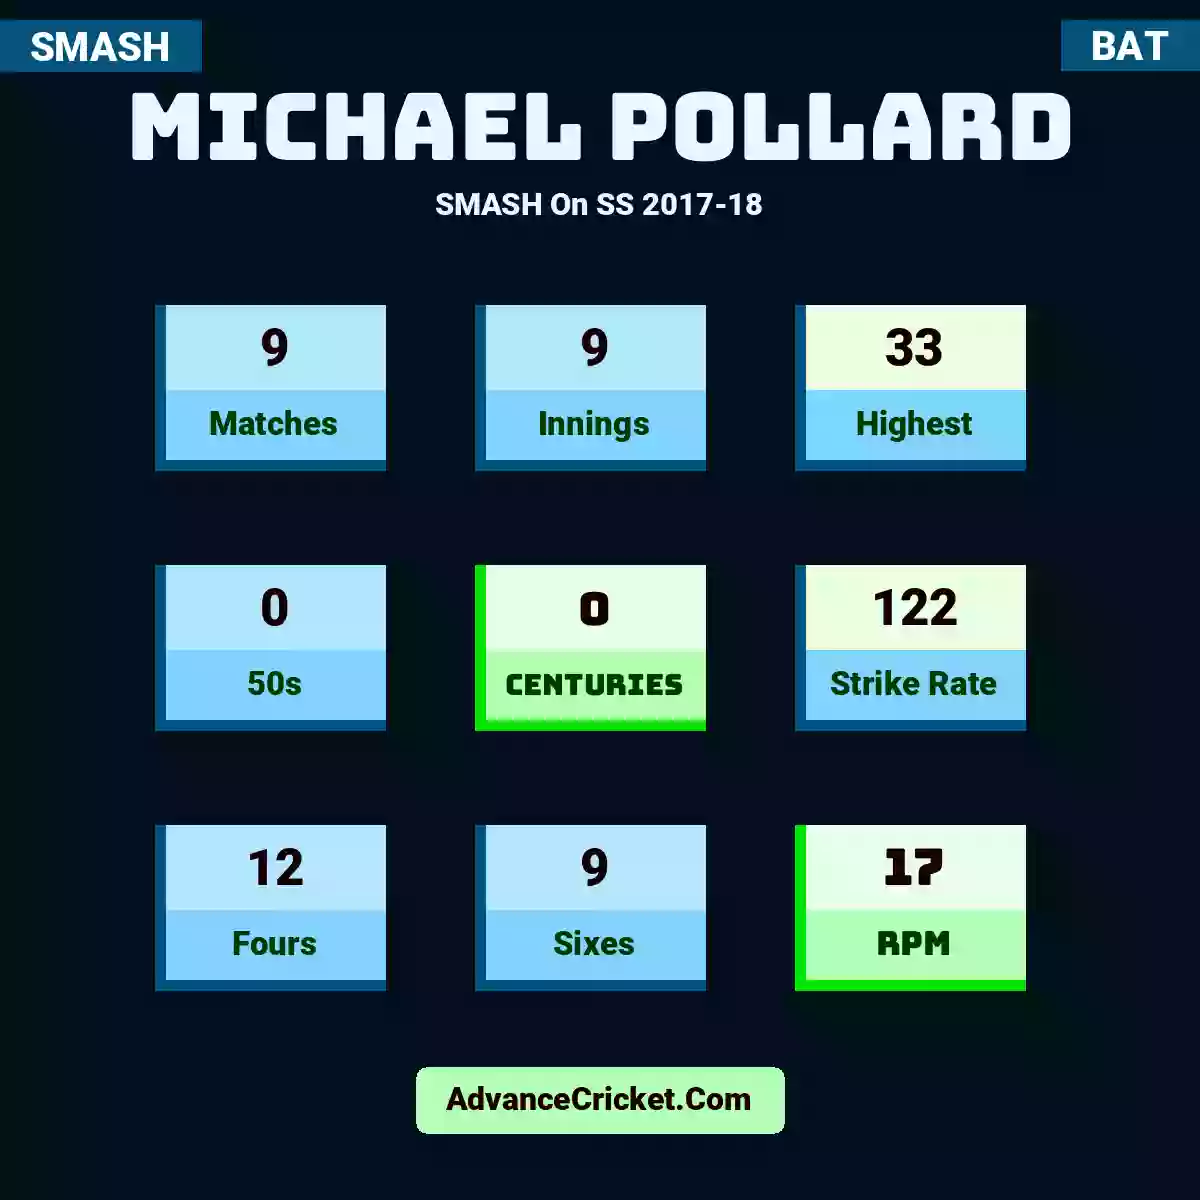 Michael Pollard SMASH  On SS 2017-18, Michael Pollard played 9 matches, scored 33 runs as highest, 0 half-centuries, and 0 centuries, with a strike rate of 122. M.Pollard hit 12 fours and 9 sixes, with an RPM of 17.